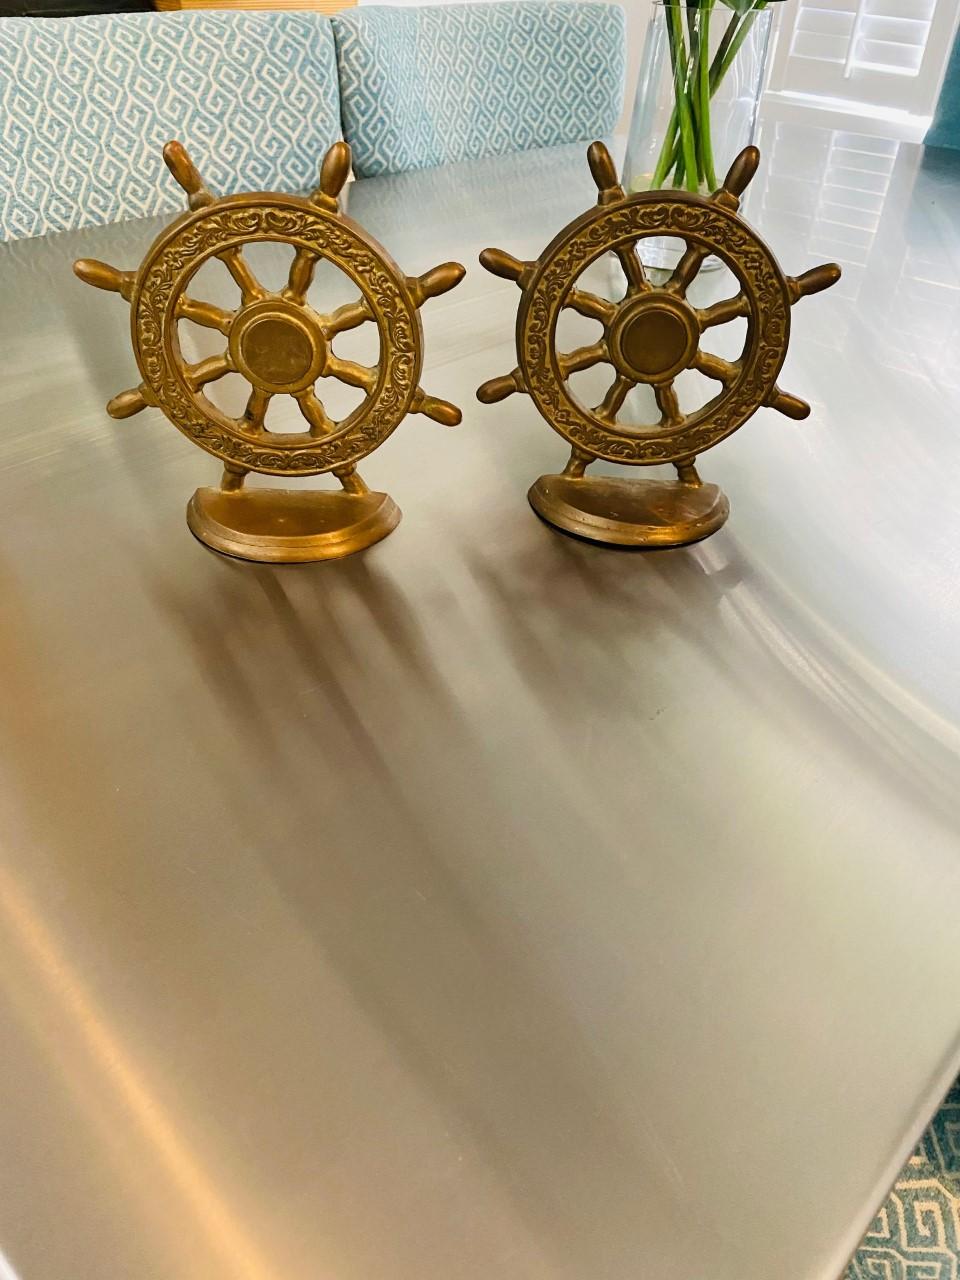 Beautifully forged in solid brass, these nautical ship wheels have a classic aesthetic that is ideal for coastal and nautical décor but can easily translate to industrial and eclectic styles. An incredible addition to your décor that will anchor